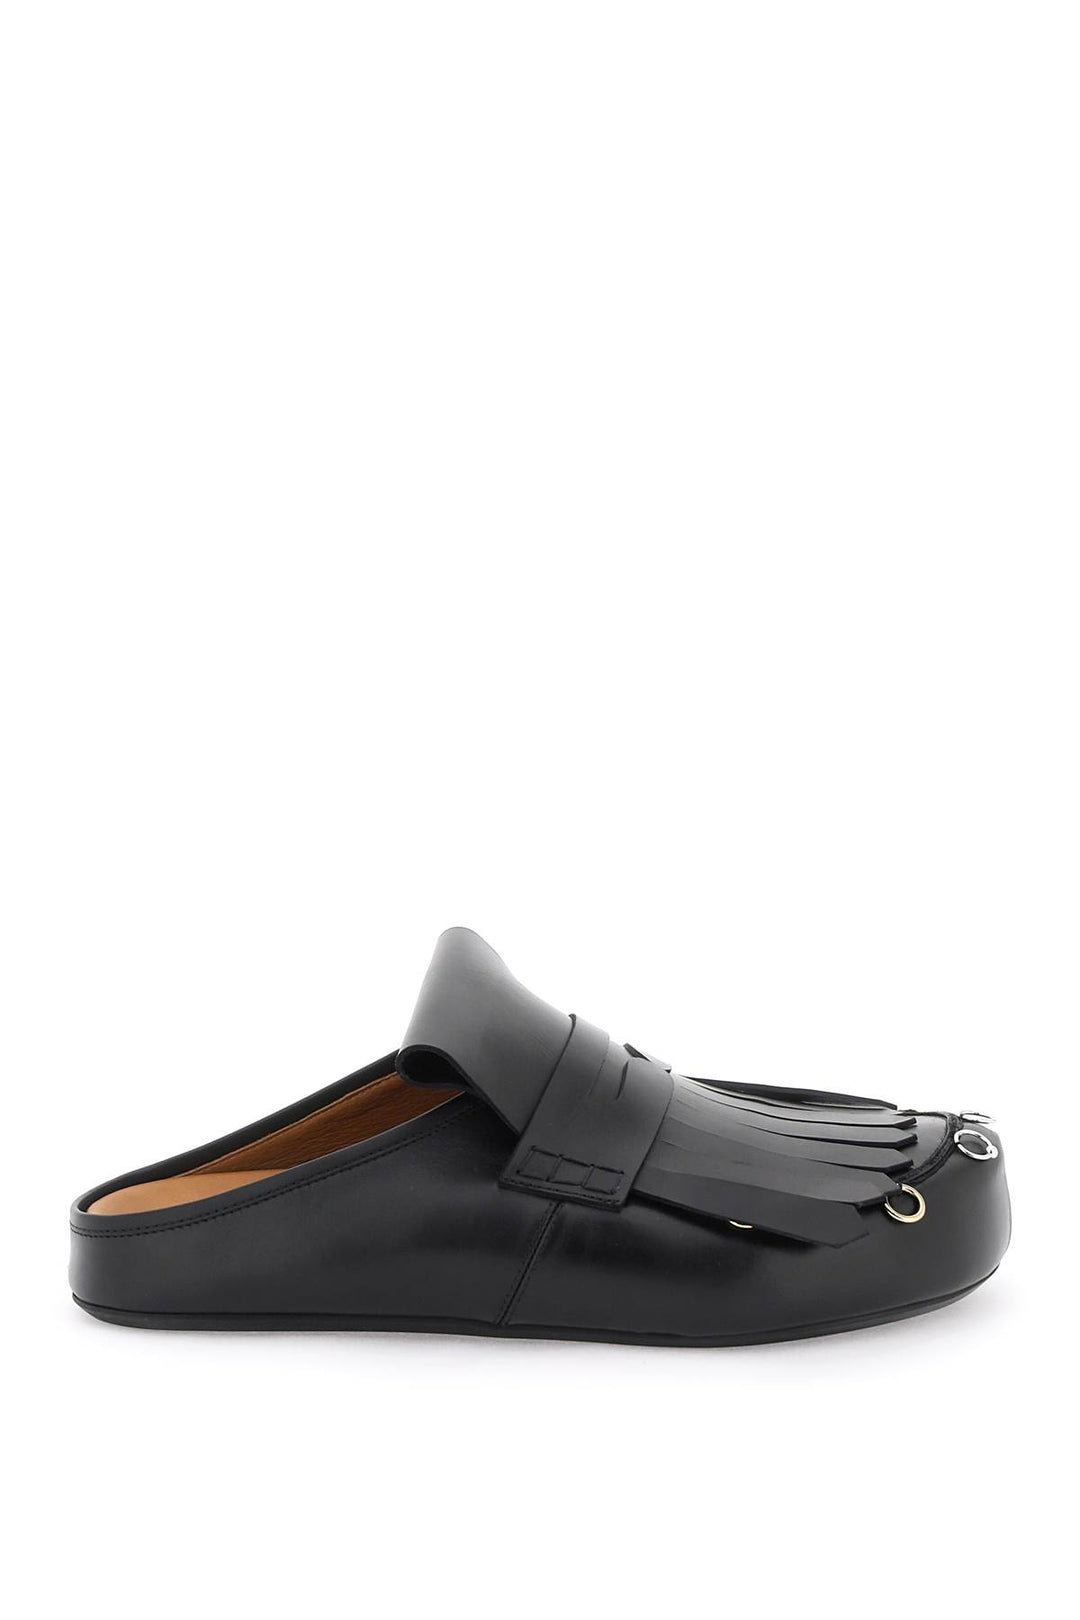 Marni Leather Clogs With Bangs And Piercings   Nero